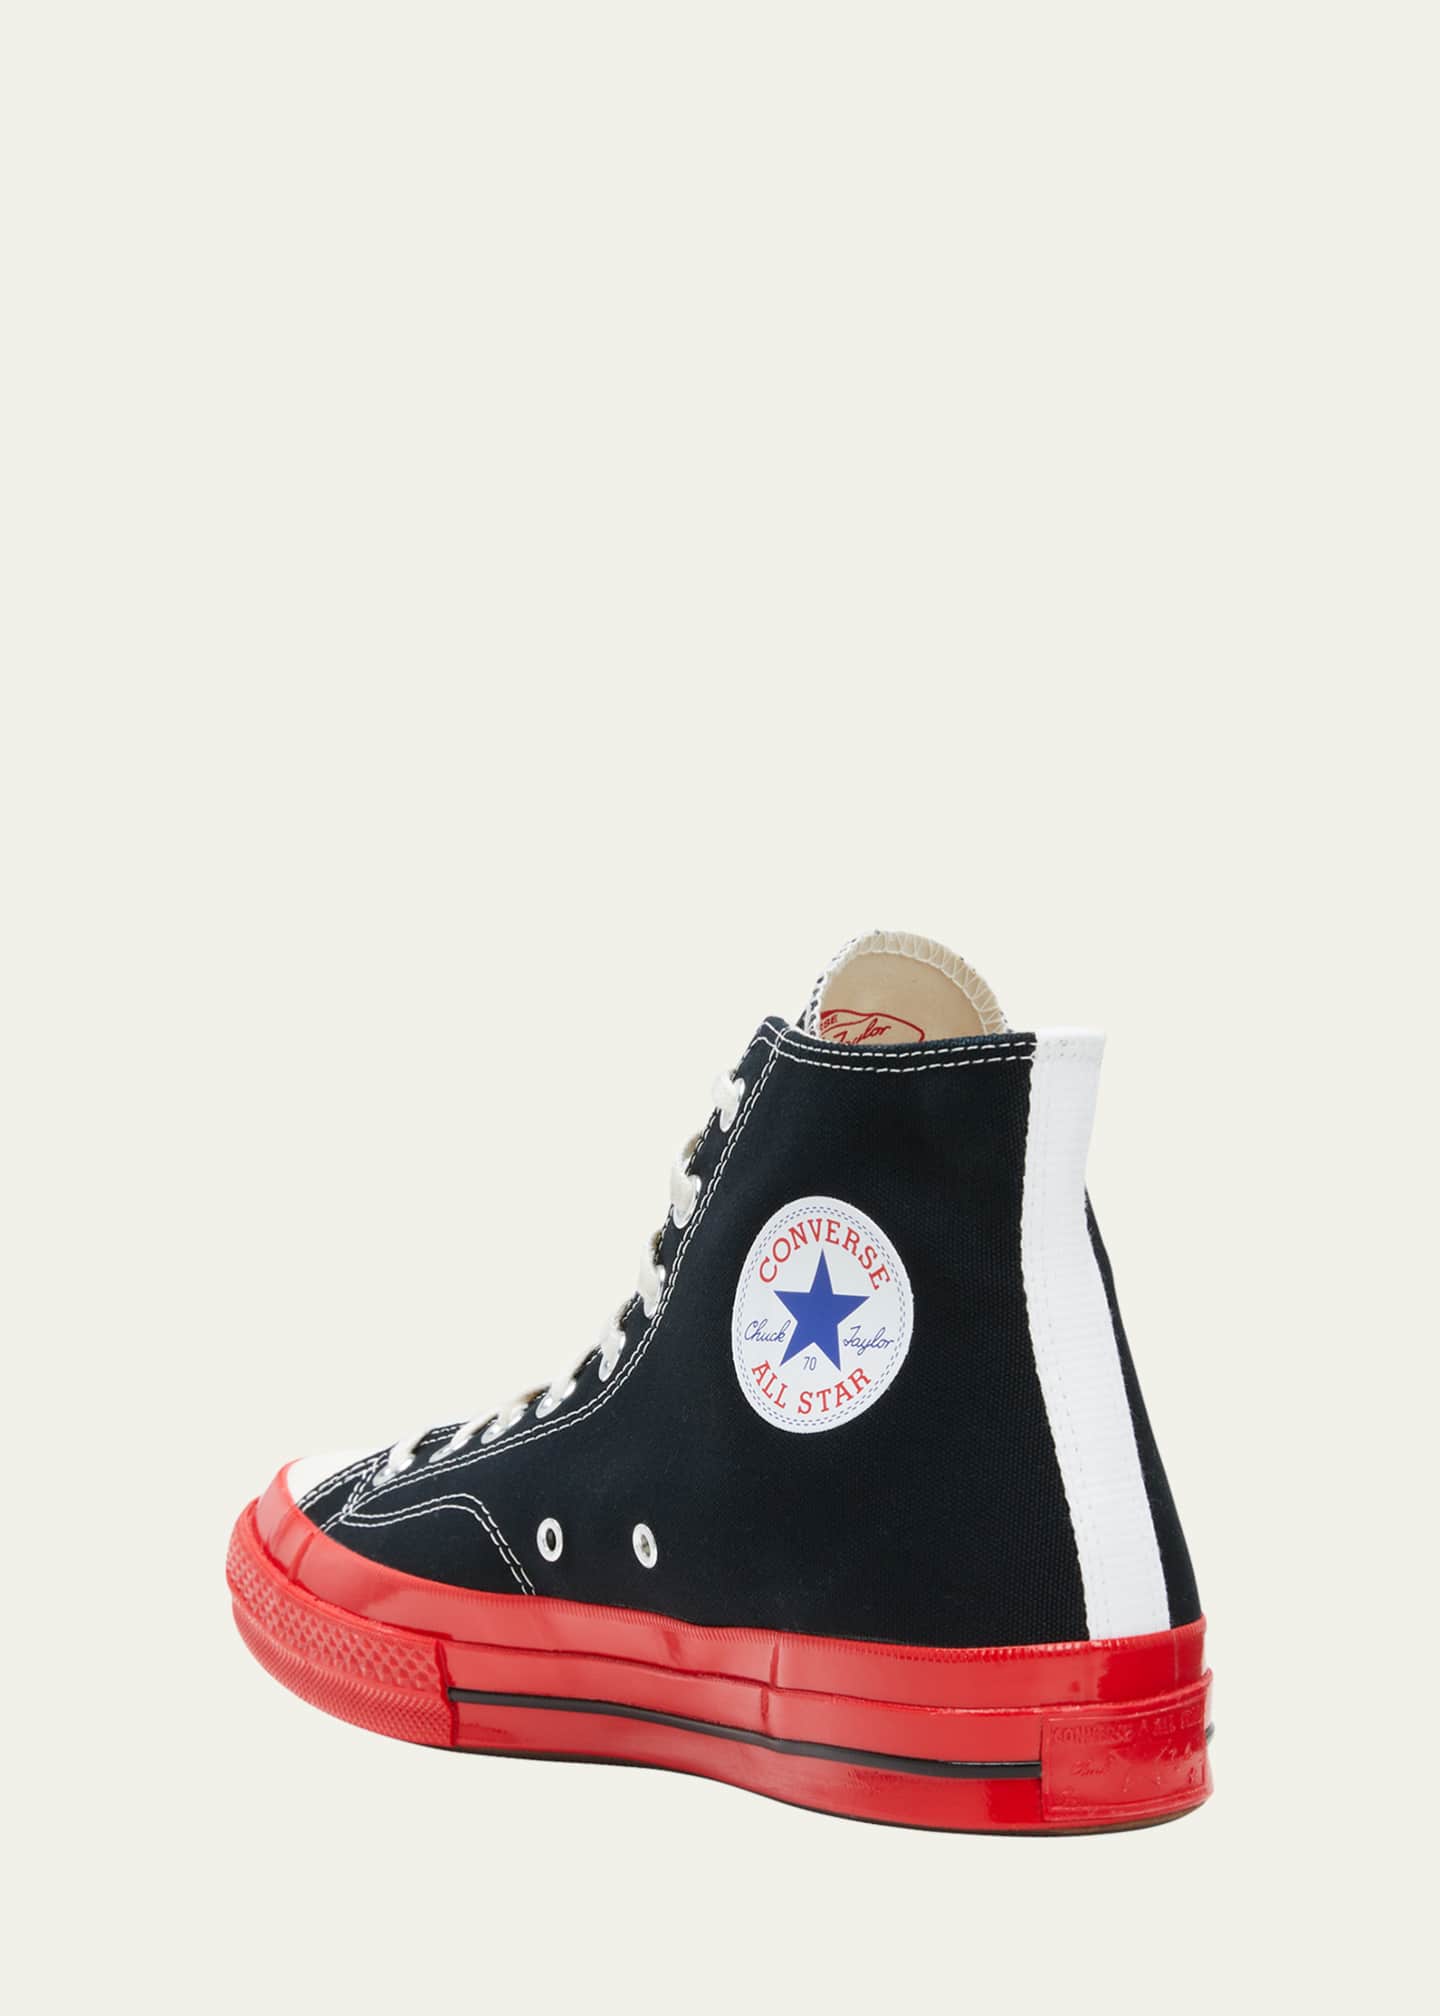 CDG Play x Converse Red Sole Canvas High-Top Sneakers - Bergdorf Goodman